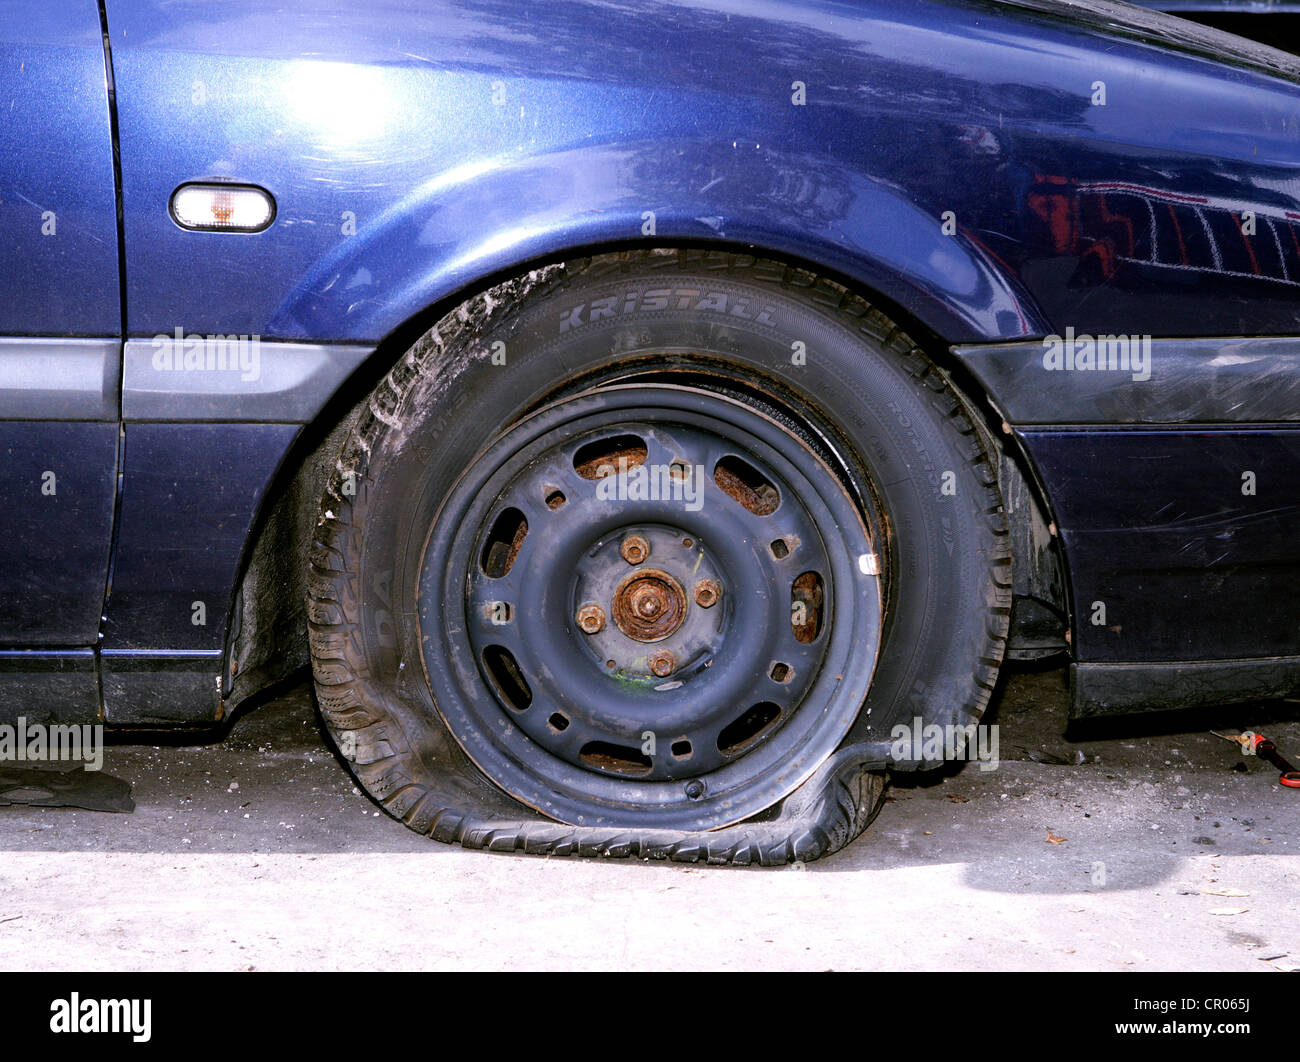 Flat tyre on a car involved in an accident Stock Photo